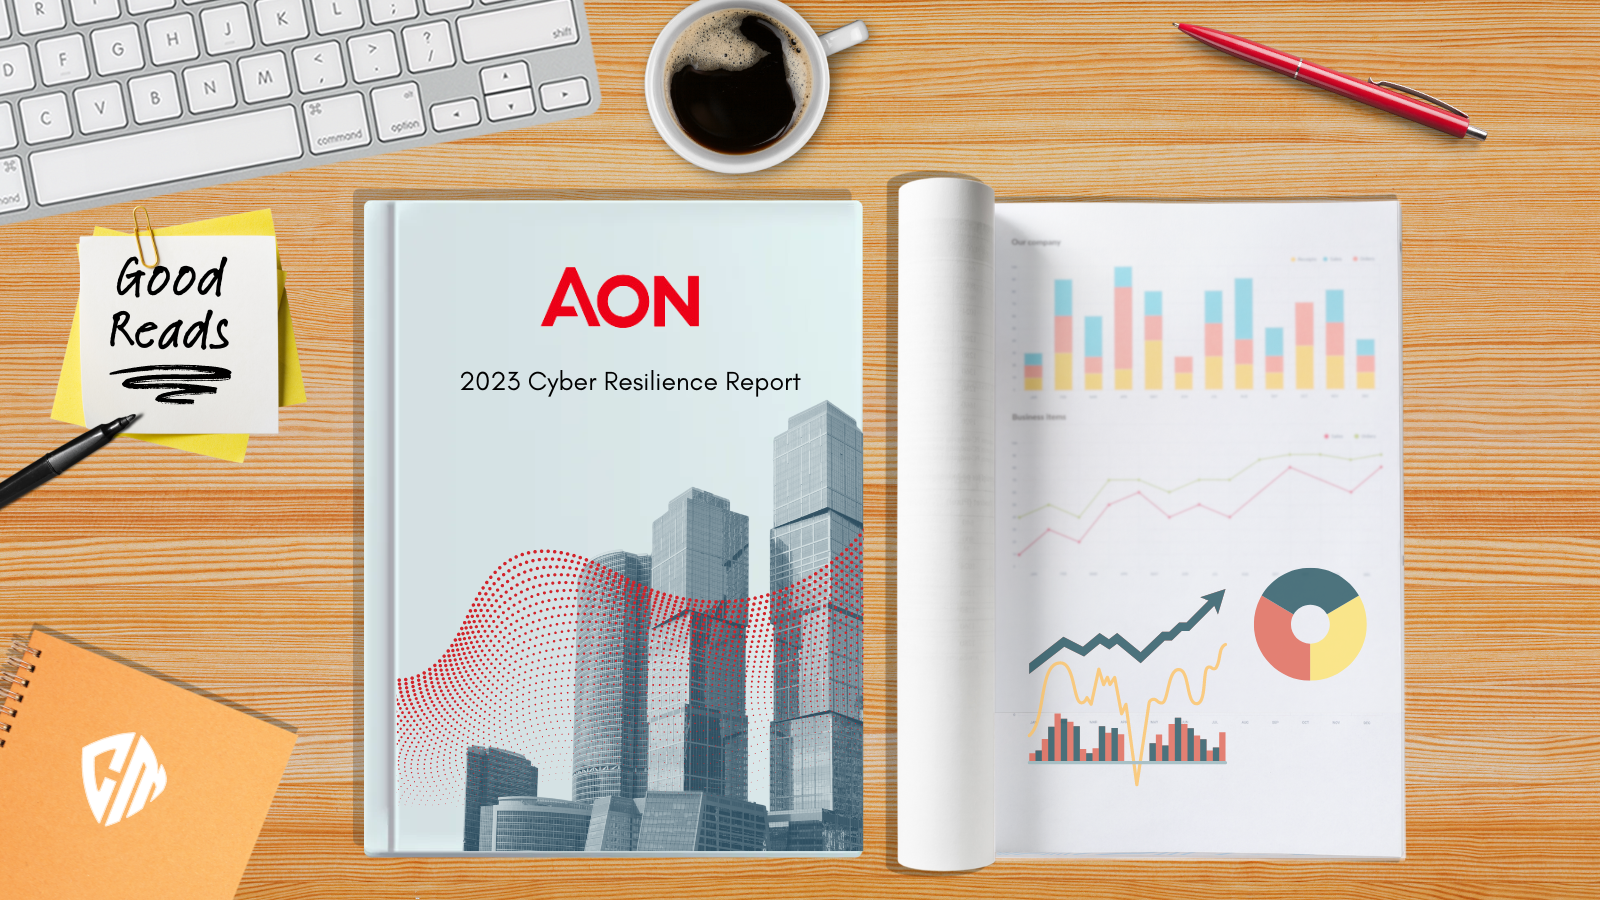 Good Reads: The Aon 2023 Cyber Resilience Report